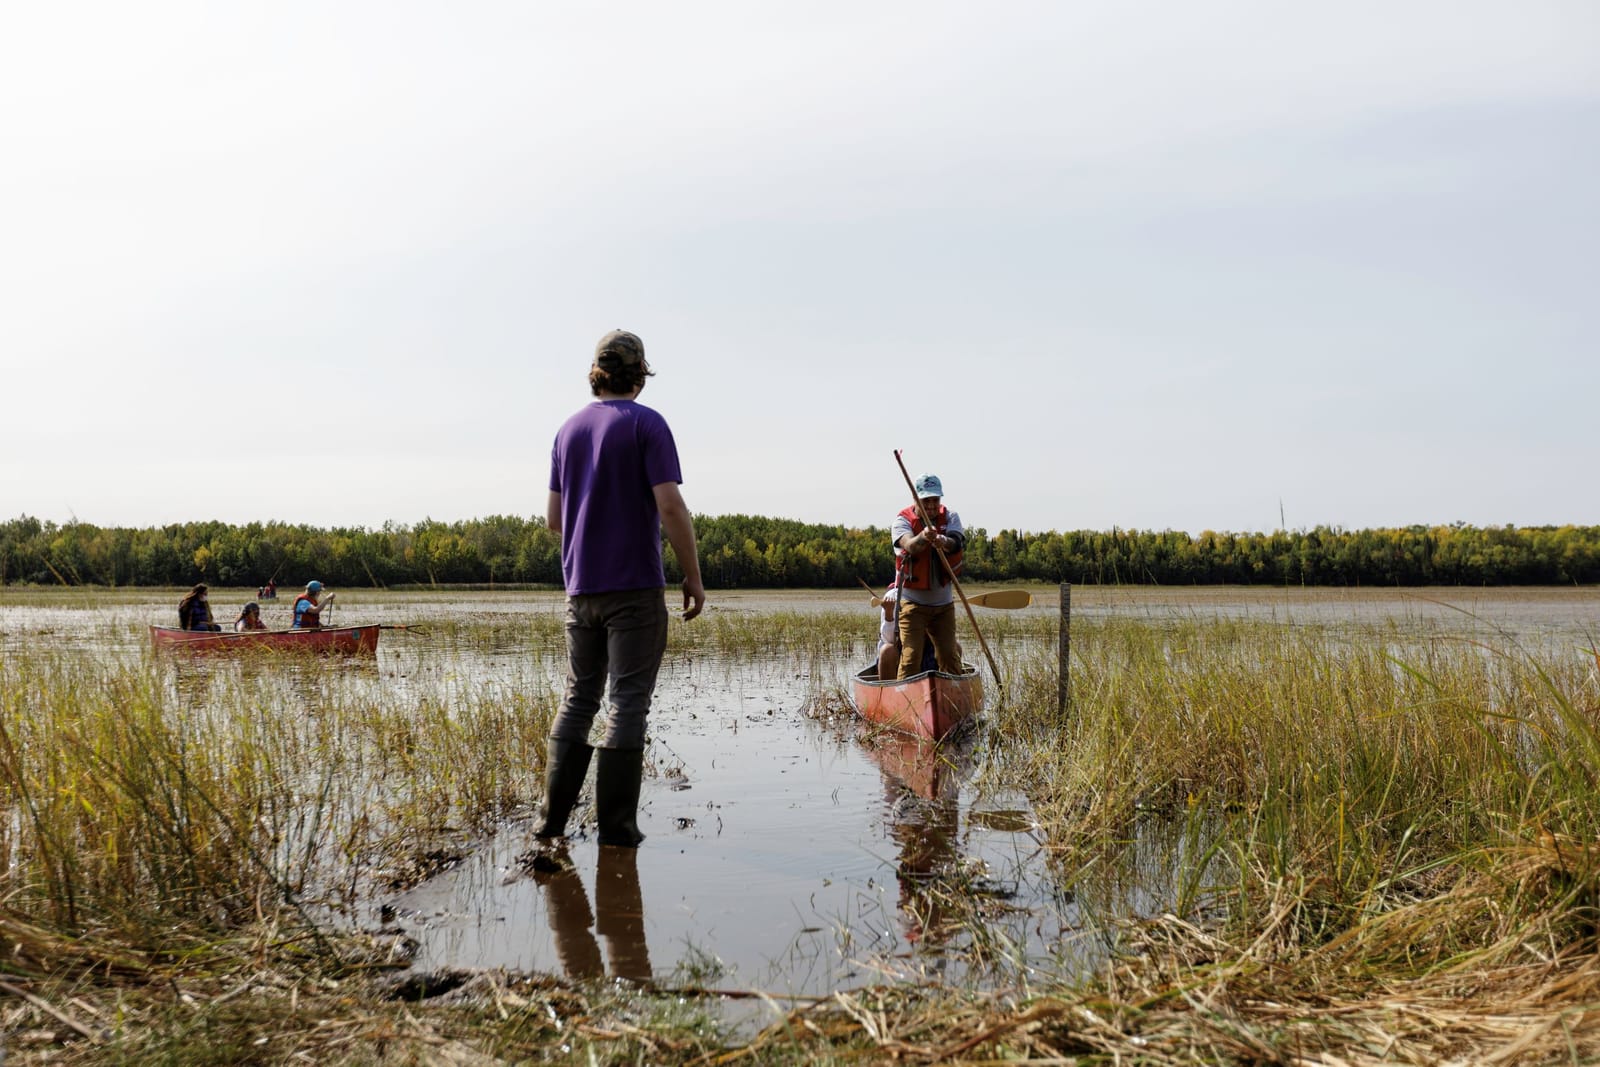 Three canoes in the middle and far distance paddle through wild rice beds in a shallow lake. A person stands with their pack to the camera in black rainboots and a purple t-shirt ankle-deep in the lake.